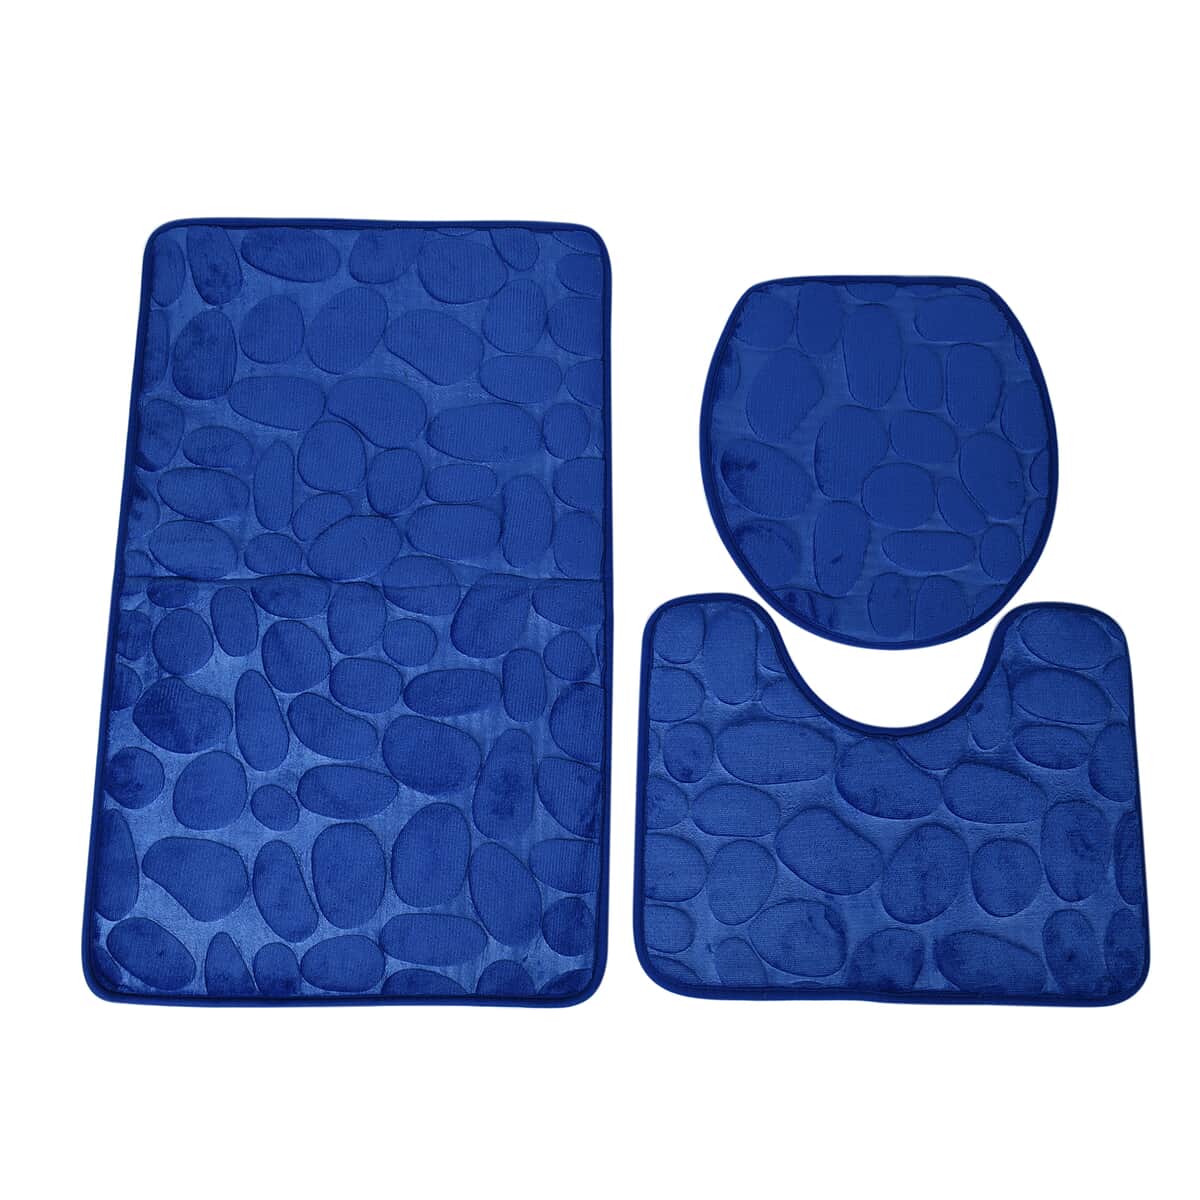 Set of 3 Piece - Blue Polyester Door Mat (19x31"), Toilet Mat (19x15") and Toilet Cover (15x16.5") image number 0